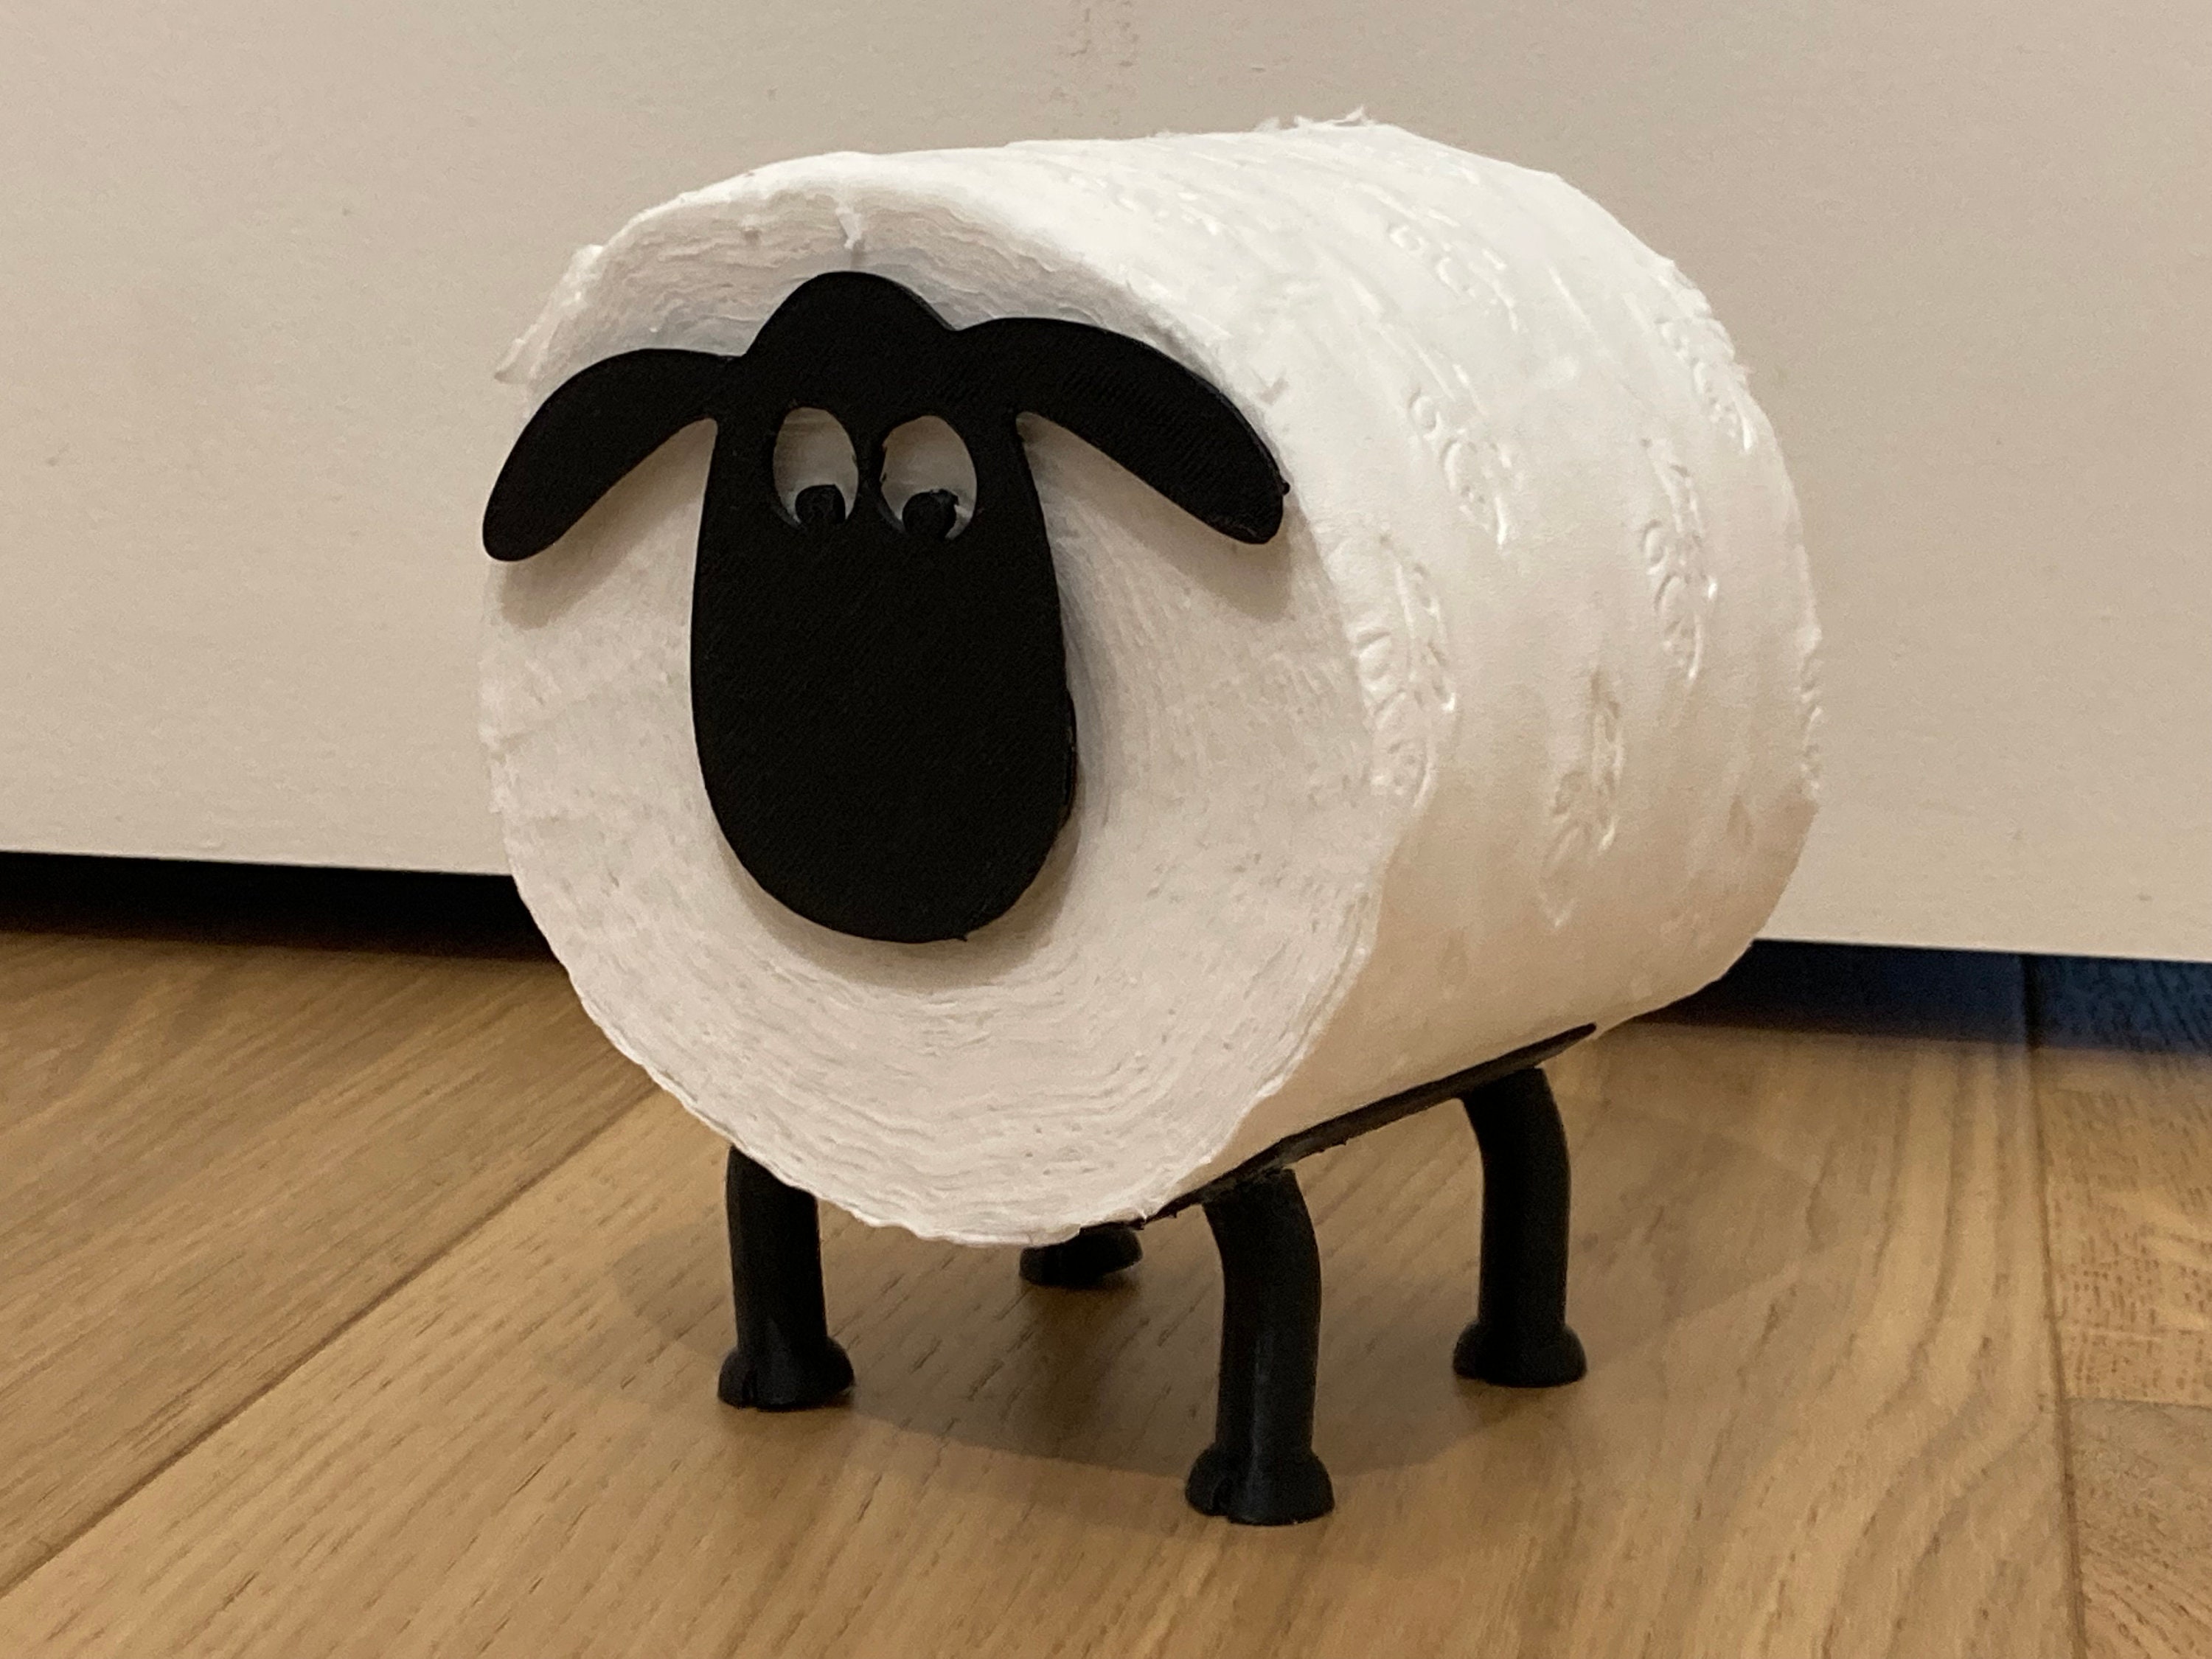 Art & Artifact Sheep Toilet Paper Roll Holder - Metal Wall Mounted or Free Standing Bathroom Tissue Storage, 7 Rolls